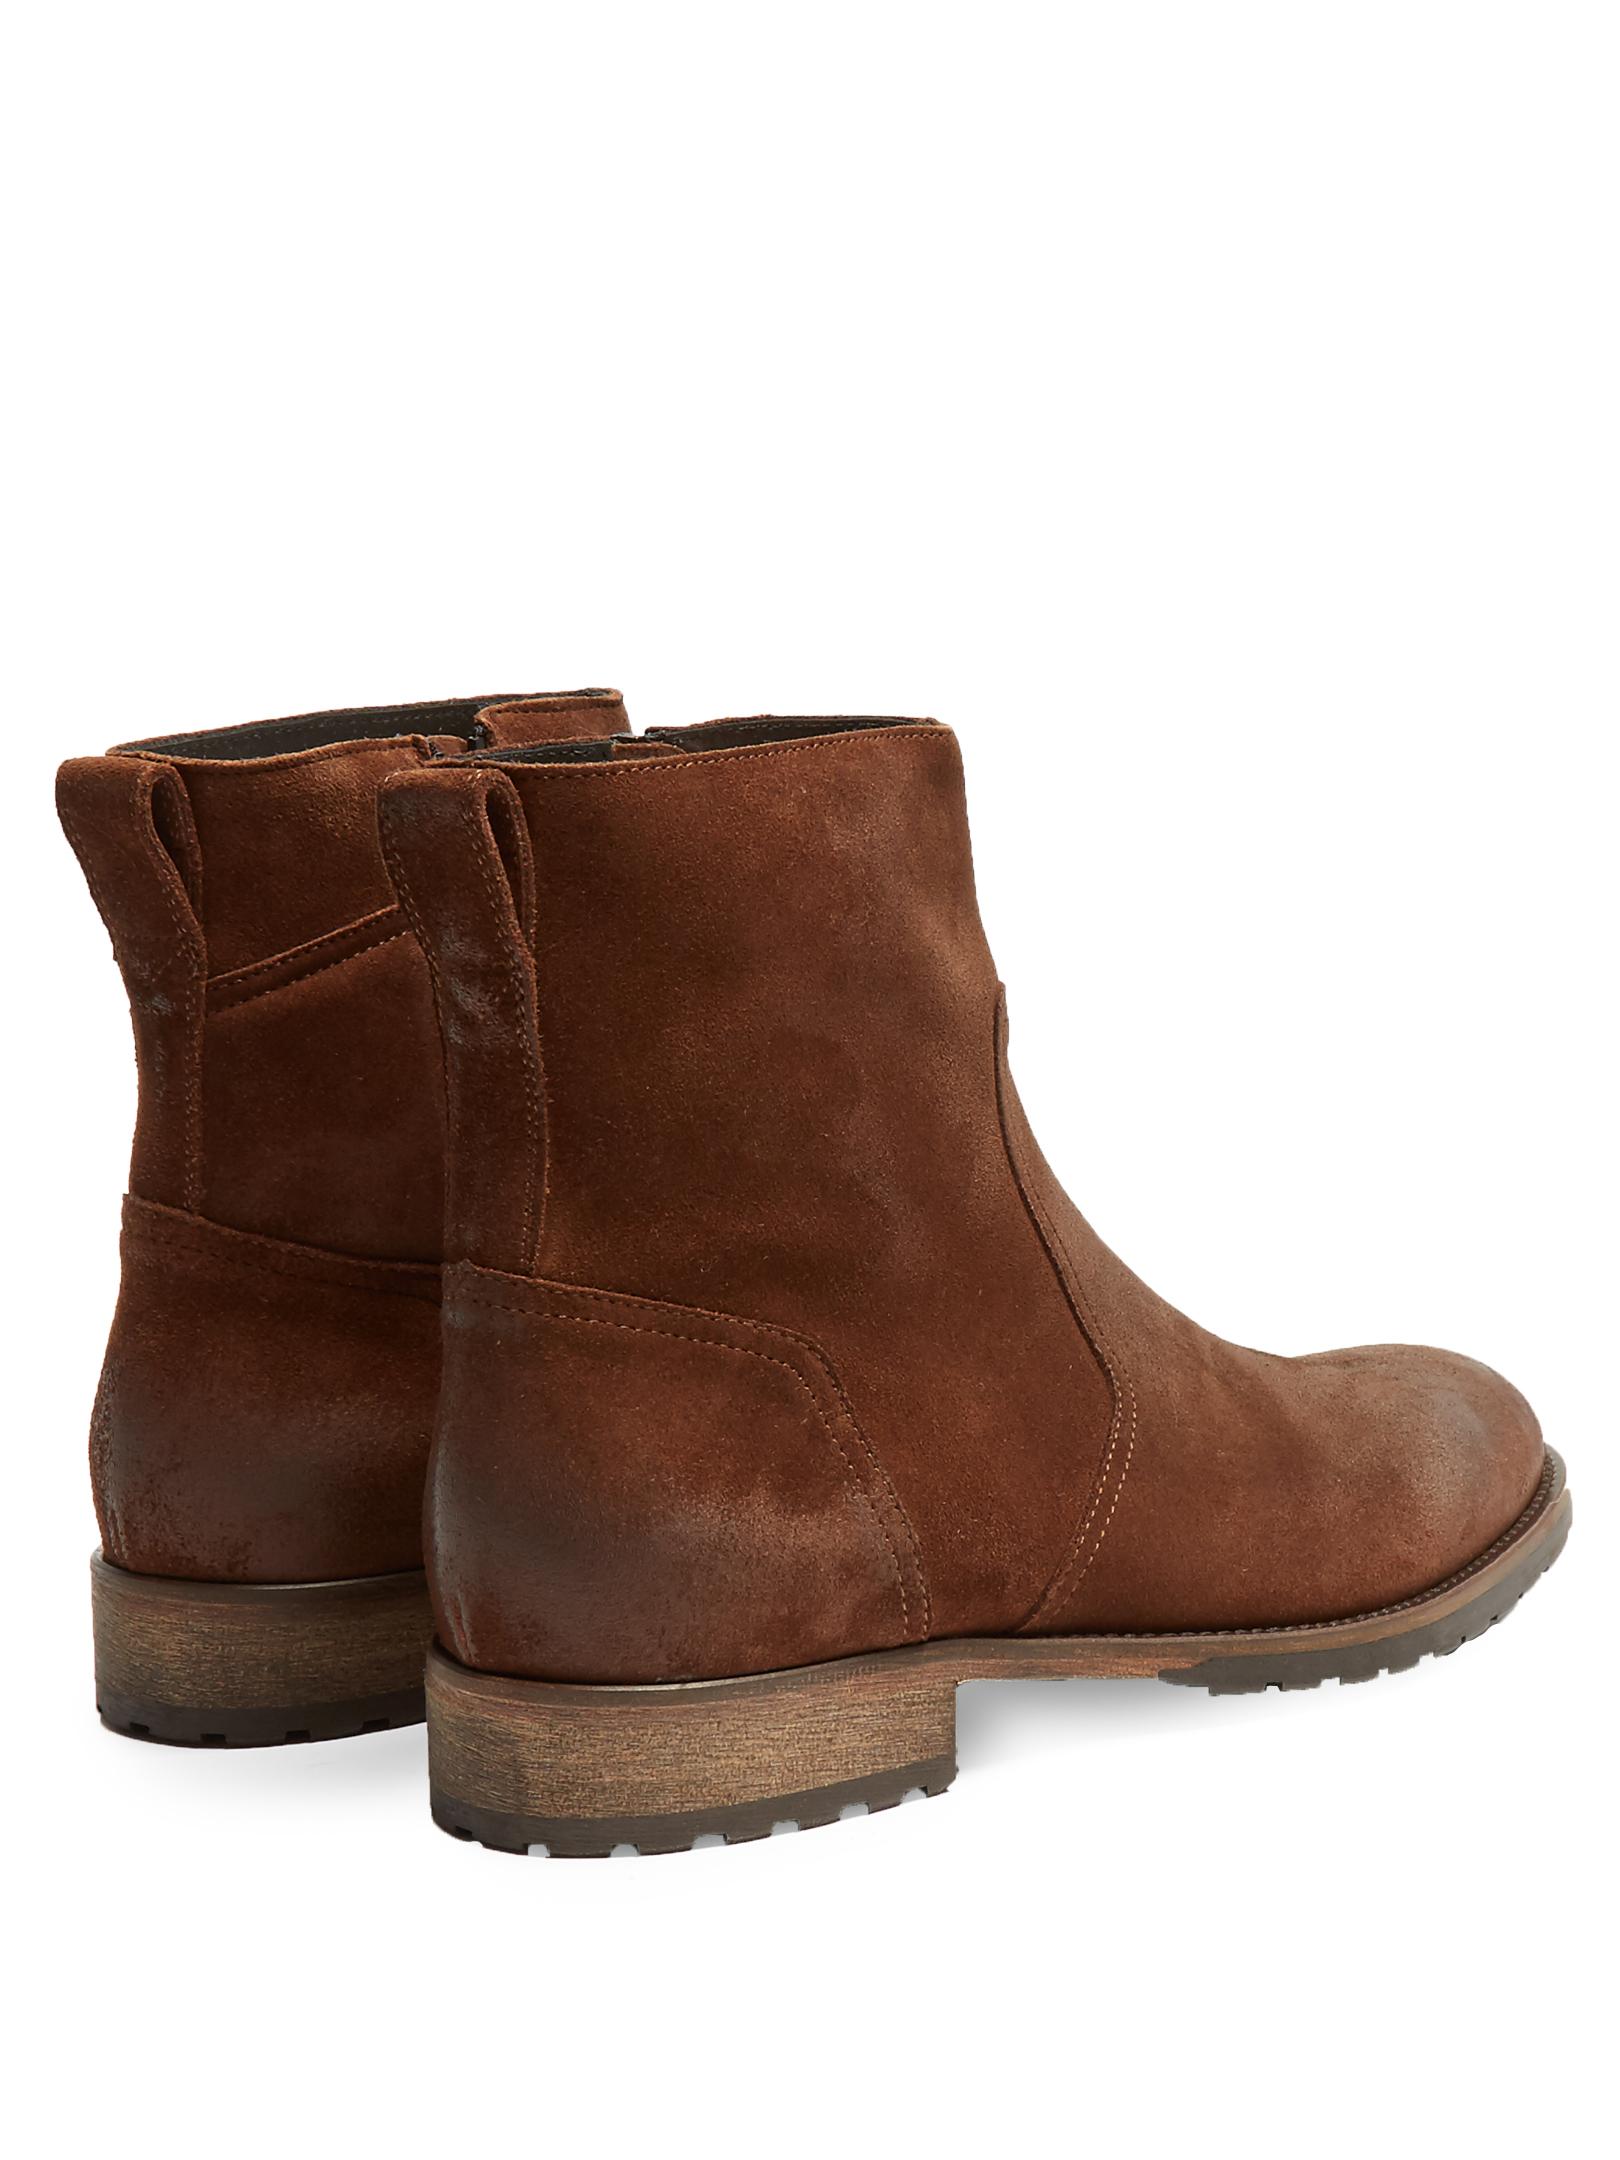 Belstaff Attwell Burnished-suede Boots in Brown for Men - Lyst